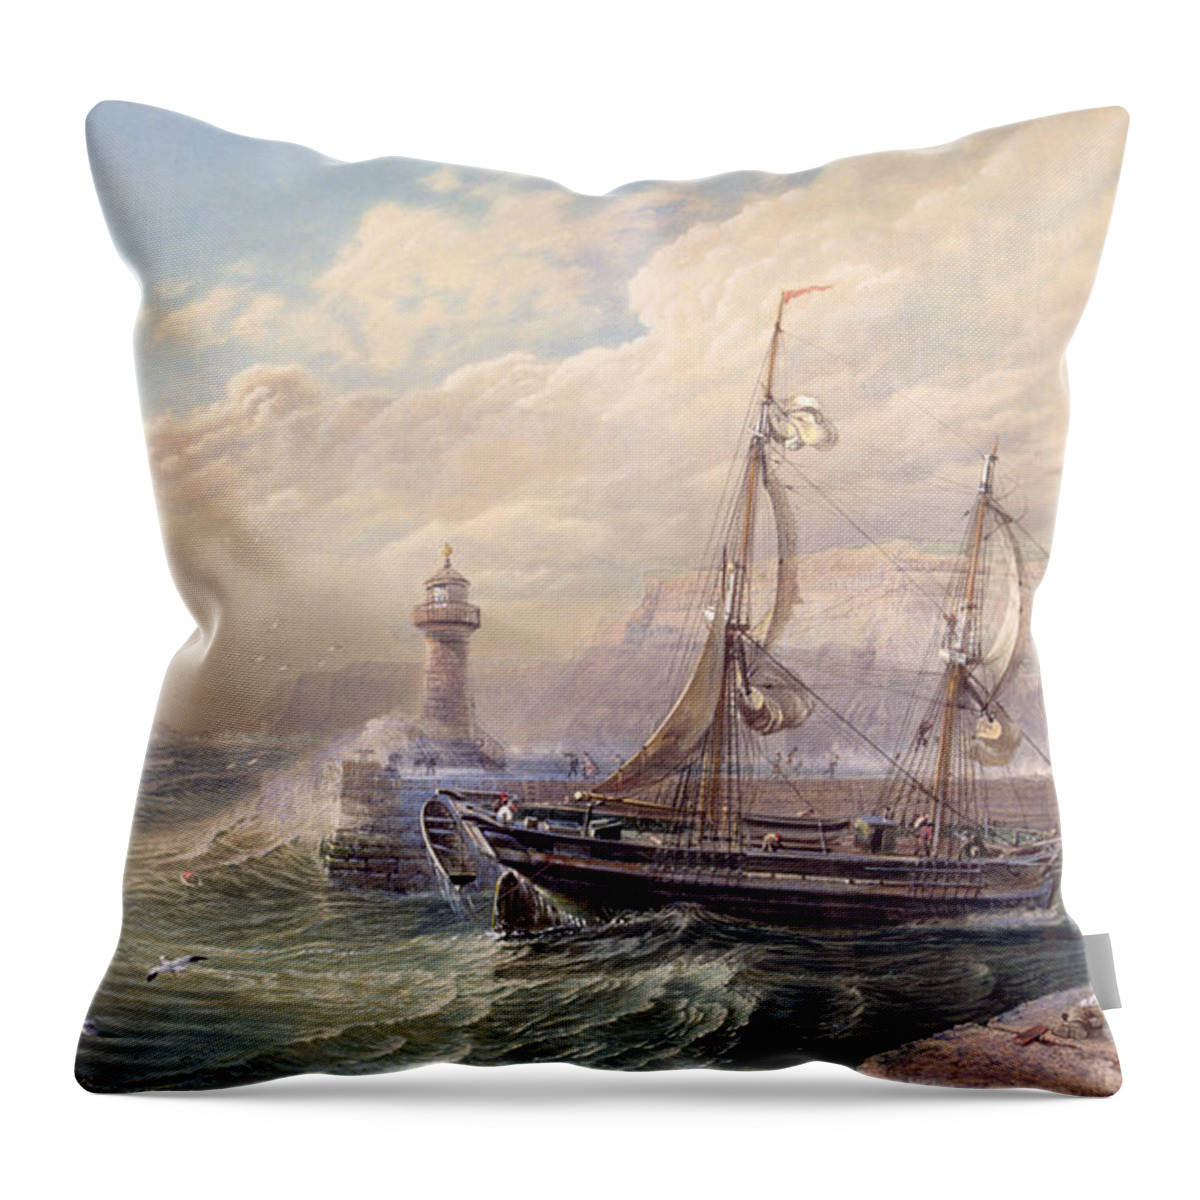 Whitby Throw Pillow featuring the painting Whitby, 1883 by Samuel Phillips Jackson